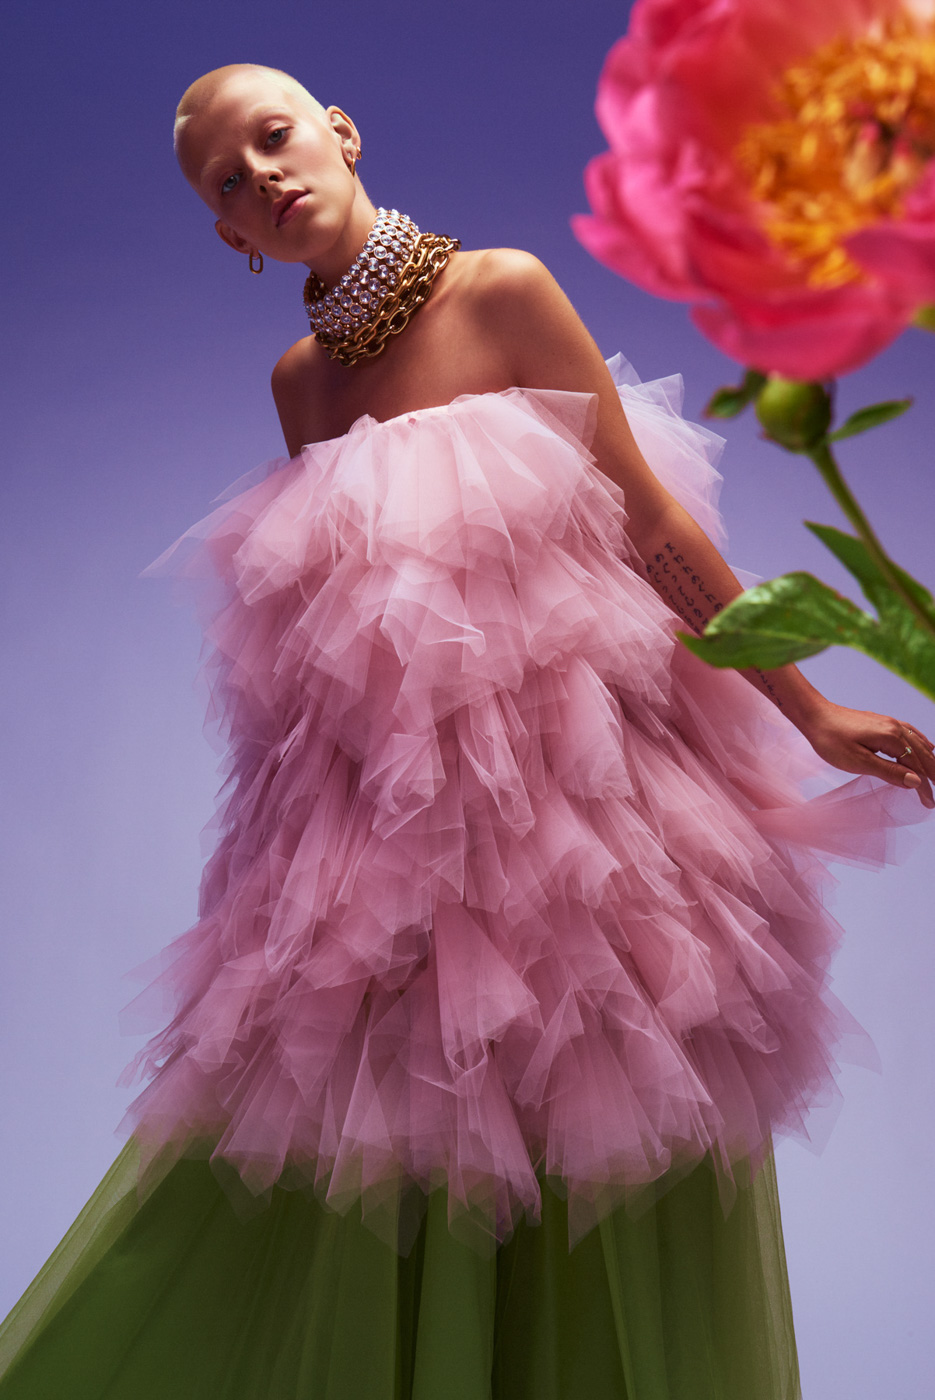 Short_haired_blond_woman_wearing_pink_and_green_tulle_dress_behind_flower_on_lilac_background_photographed_by_Sara_Lehtomaa